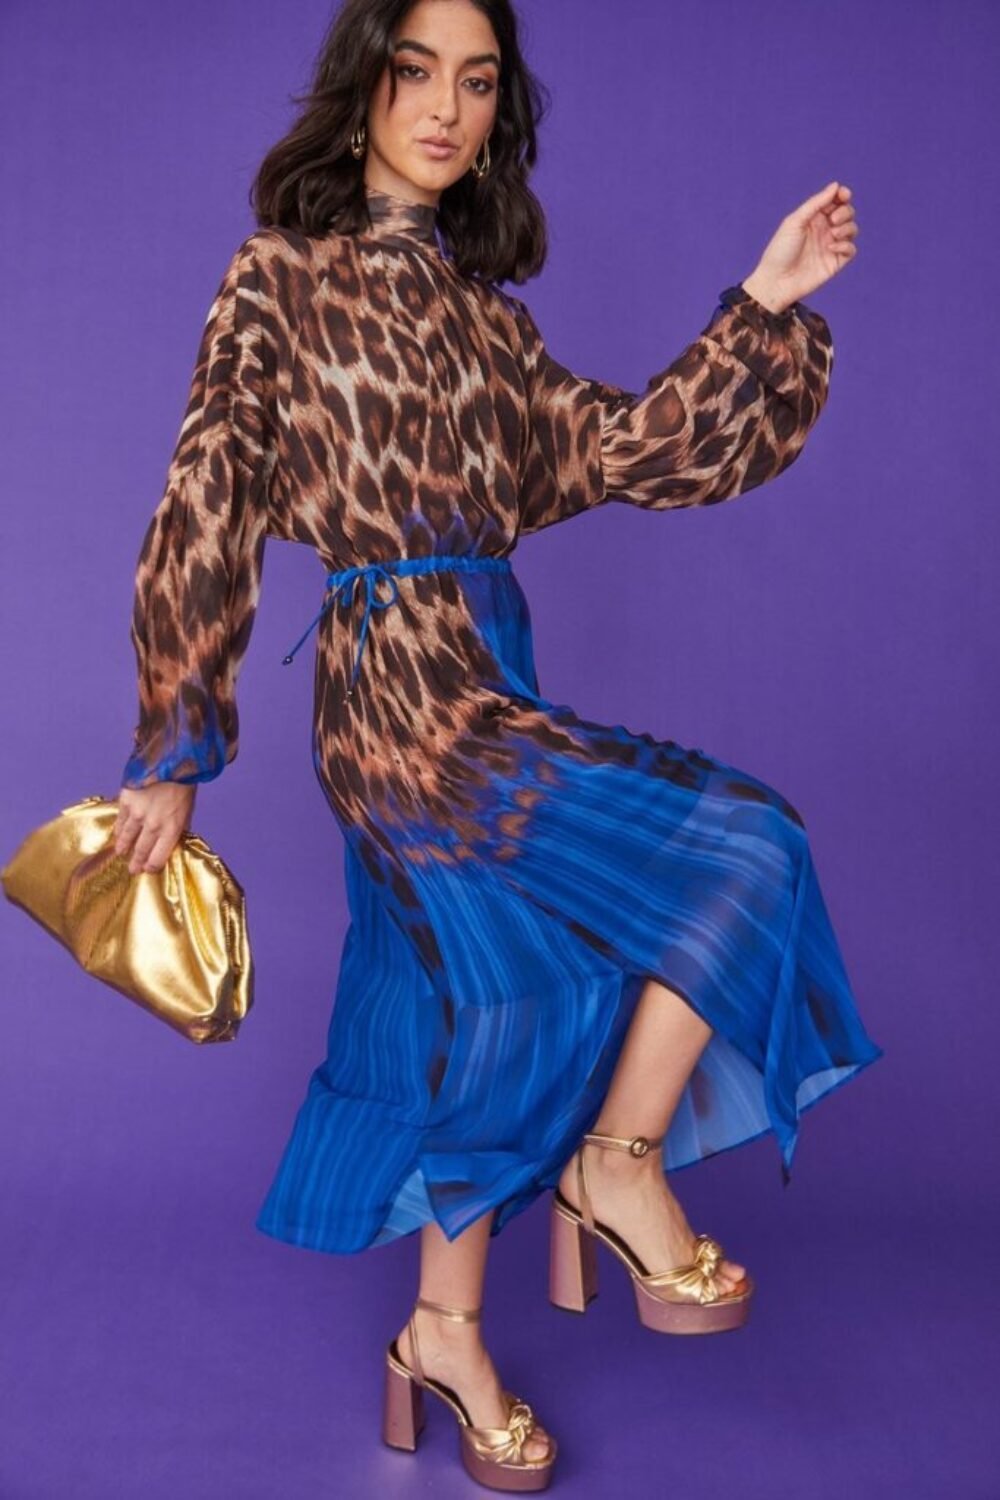 Shop Lux Silk Blend Leopard Maxi Dress and women's luxury and designer clothes at www.lux-apparel.co.uk